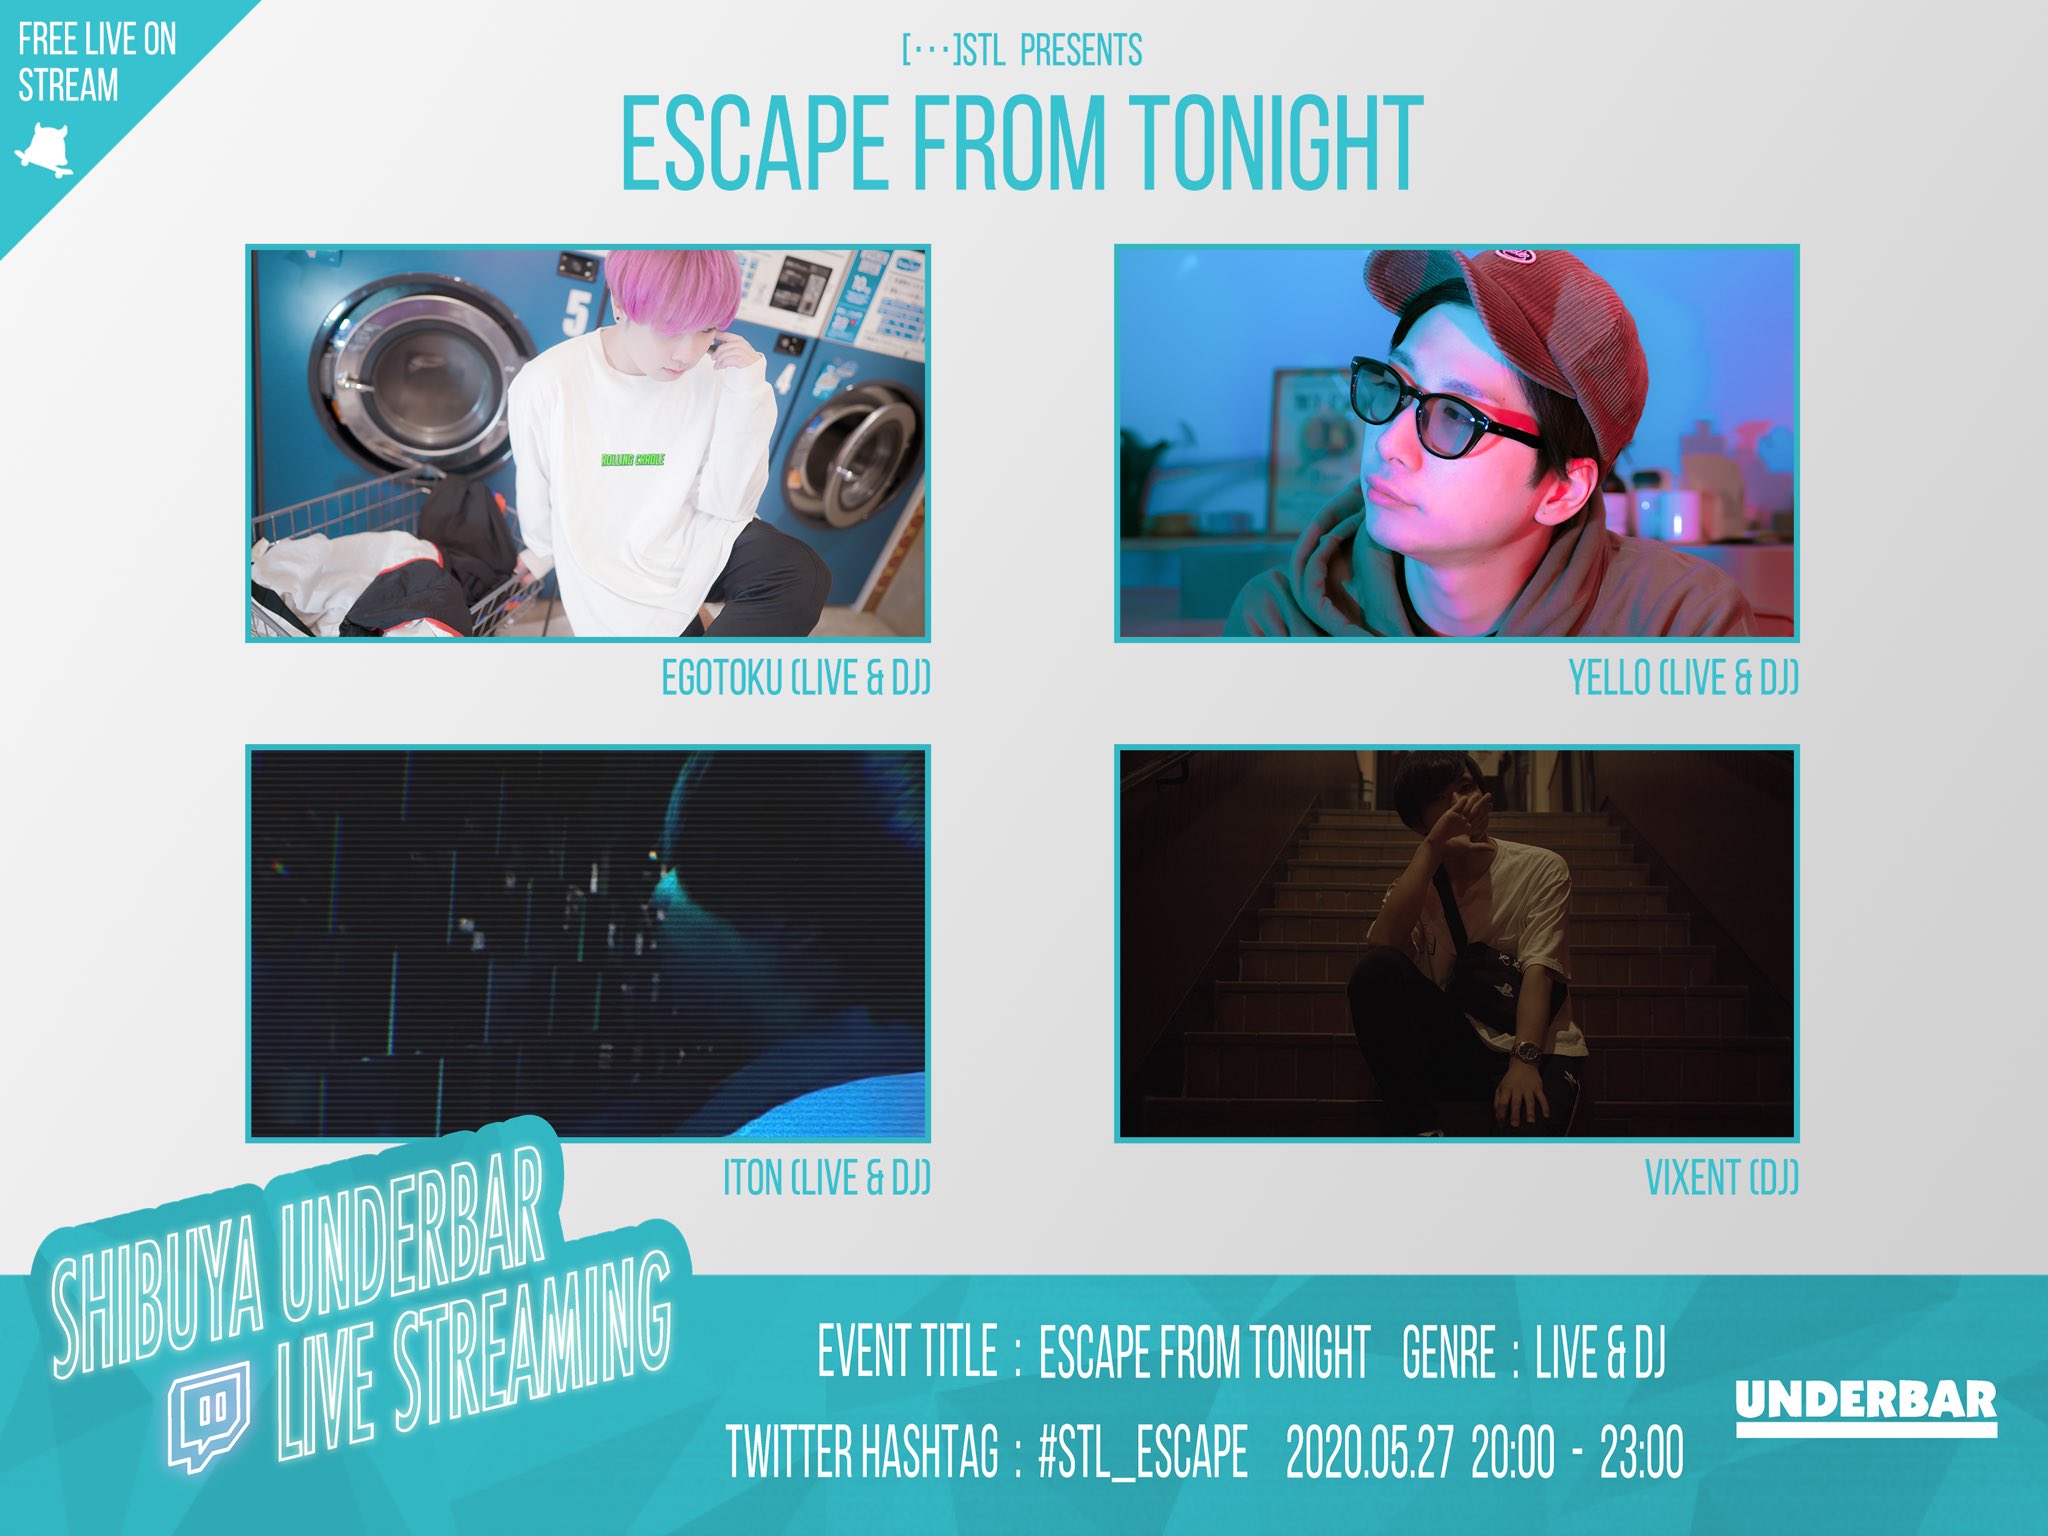 ESCAPE FROM TONIGHT